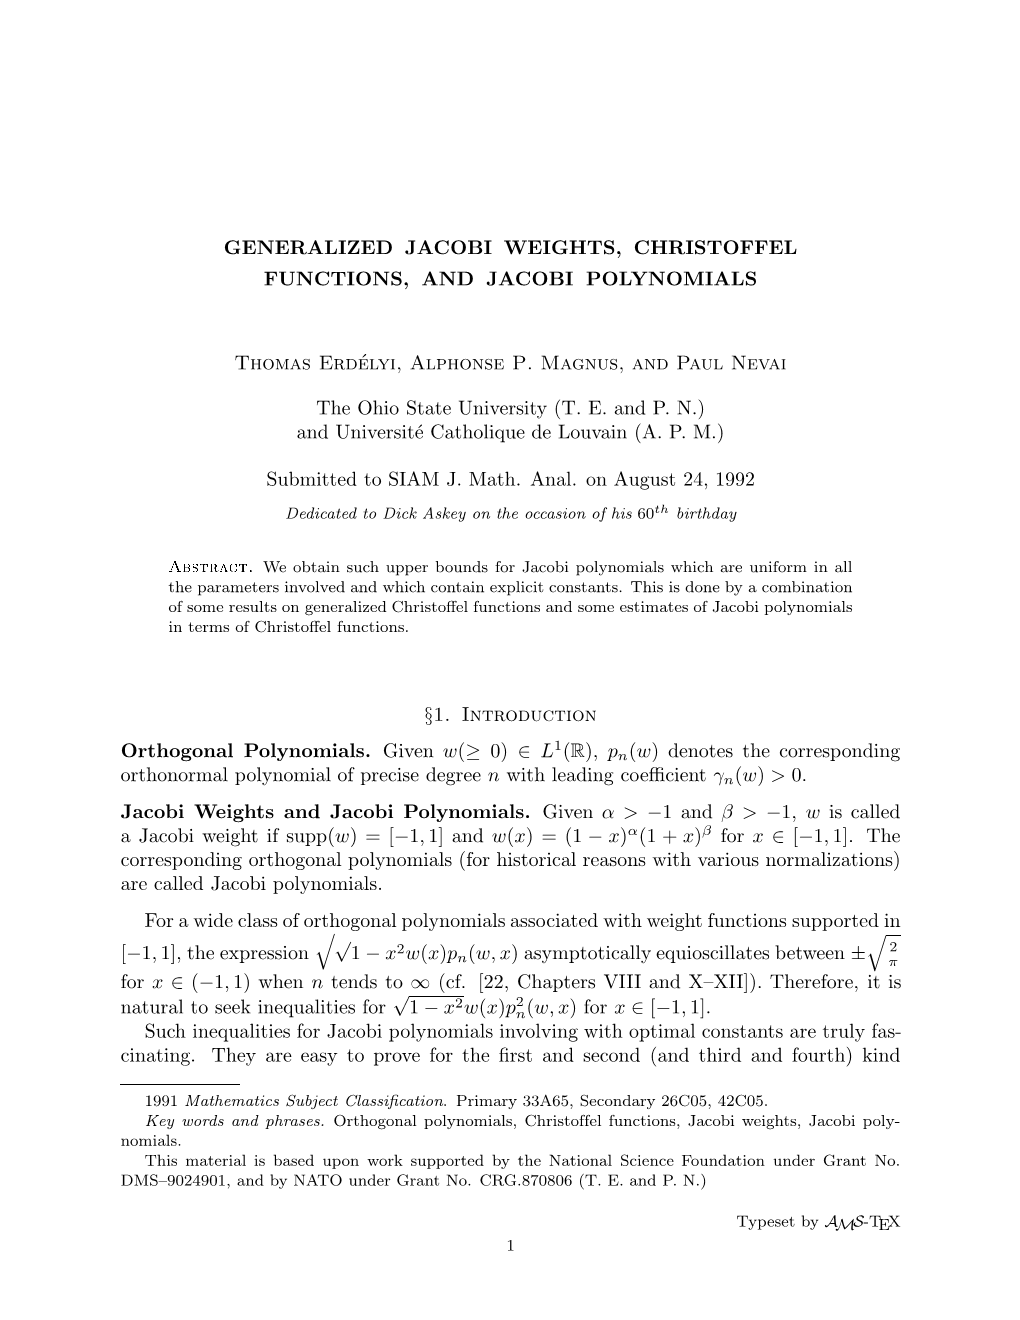 Generalized Jacobi Weights, Christoffel Functions, and Jacobi Polynomials